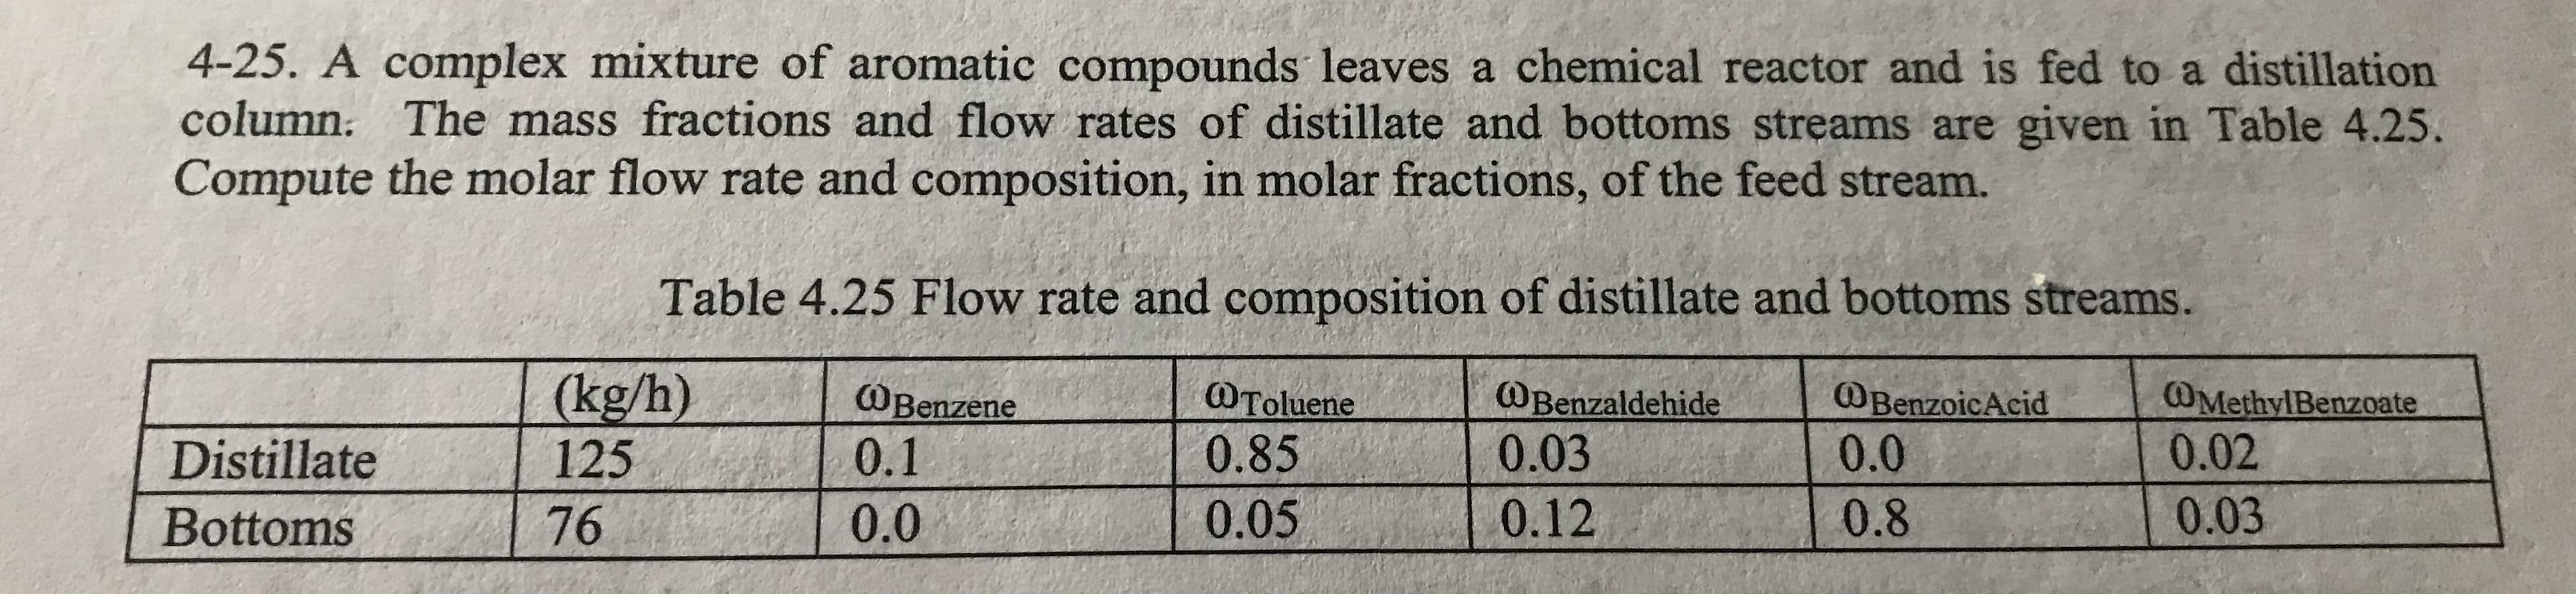 4-25. A complex mixture of aromatic compounds leaves a chemical reactor and is fed to a distillation
column: The mass fractions and flow rates of distillate and bottoms streams are given in Table 4.25.
Compute the molar flow rate and composition, in molar fractions, of the feed stream.
Table 4.25 Flow rate and composition of distillate and bottoms streams.
(kg/h)
OBenzaldehide
OBenzoicAcid
0.0
OMethylBenzoate
OToluene
0.85
OBenzene
0.1
0.03
0.02
Distillate
125
0.8
0.03
0.12
0.05
0.0
76
Bottoms
